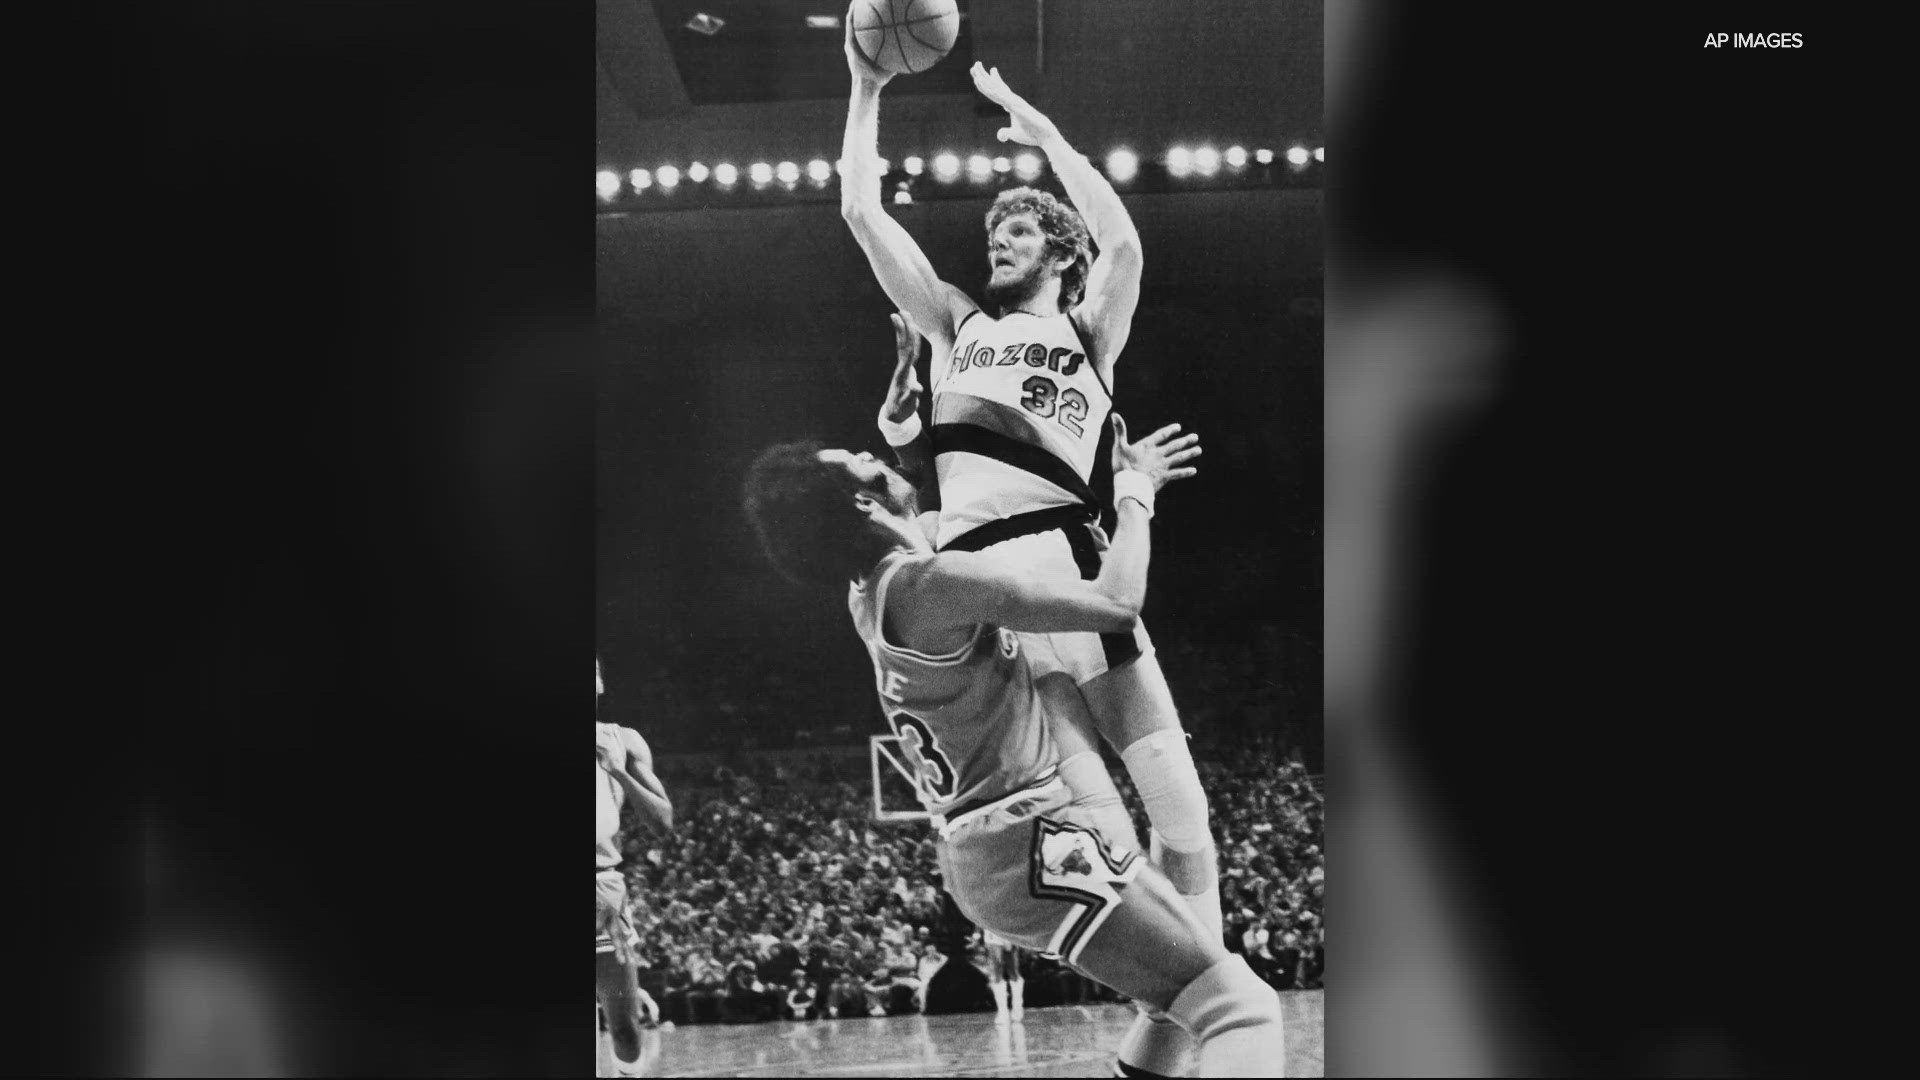 Walton was the NBA's MVP in the 1977-78 season, a two-time champion and a member of both the NBA's 50th anniversary and 75th anniversary teams.